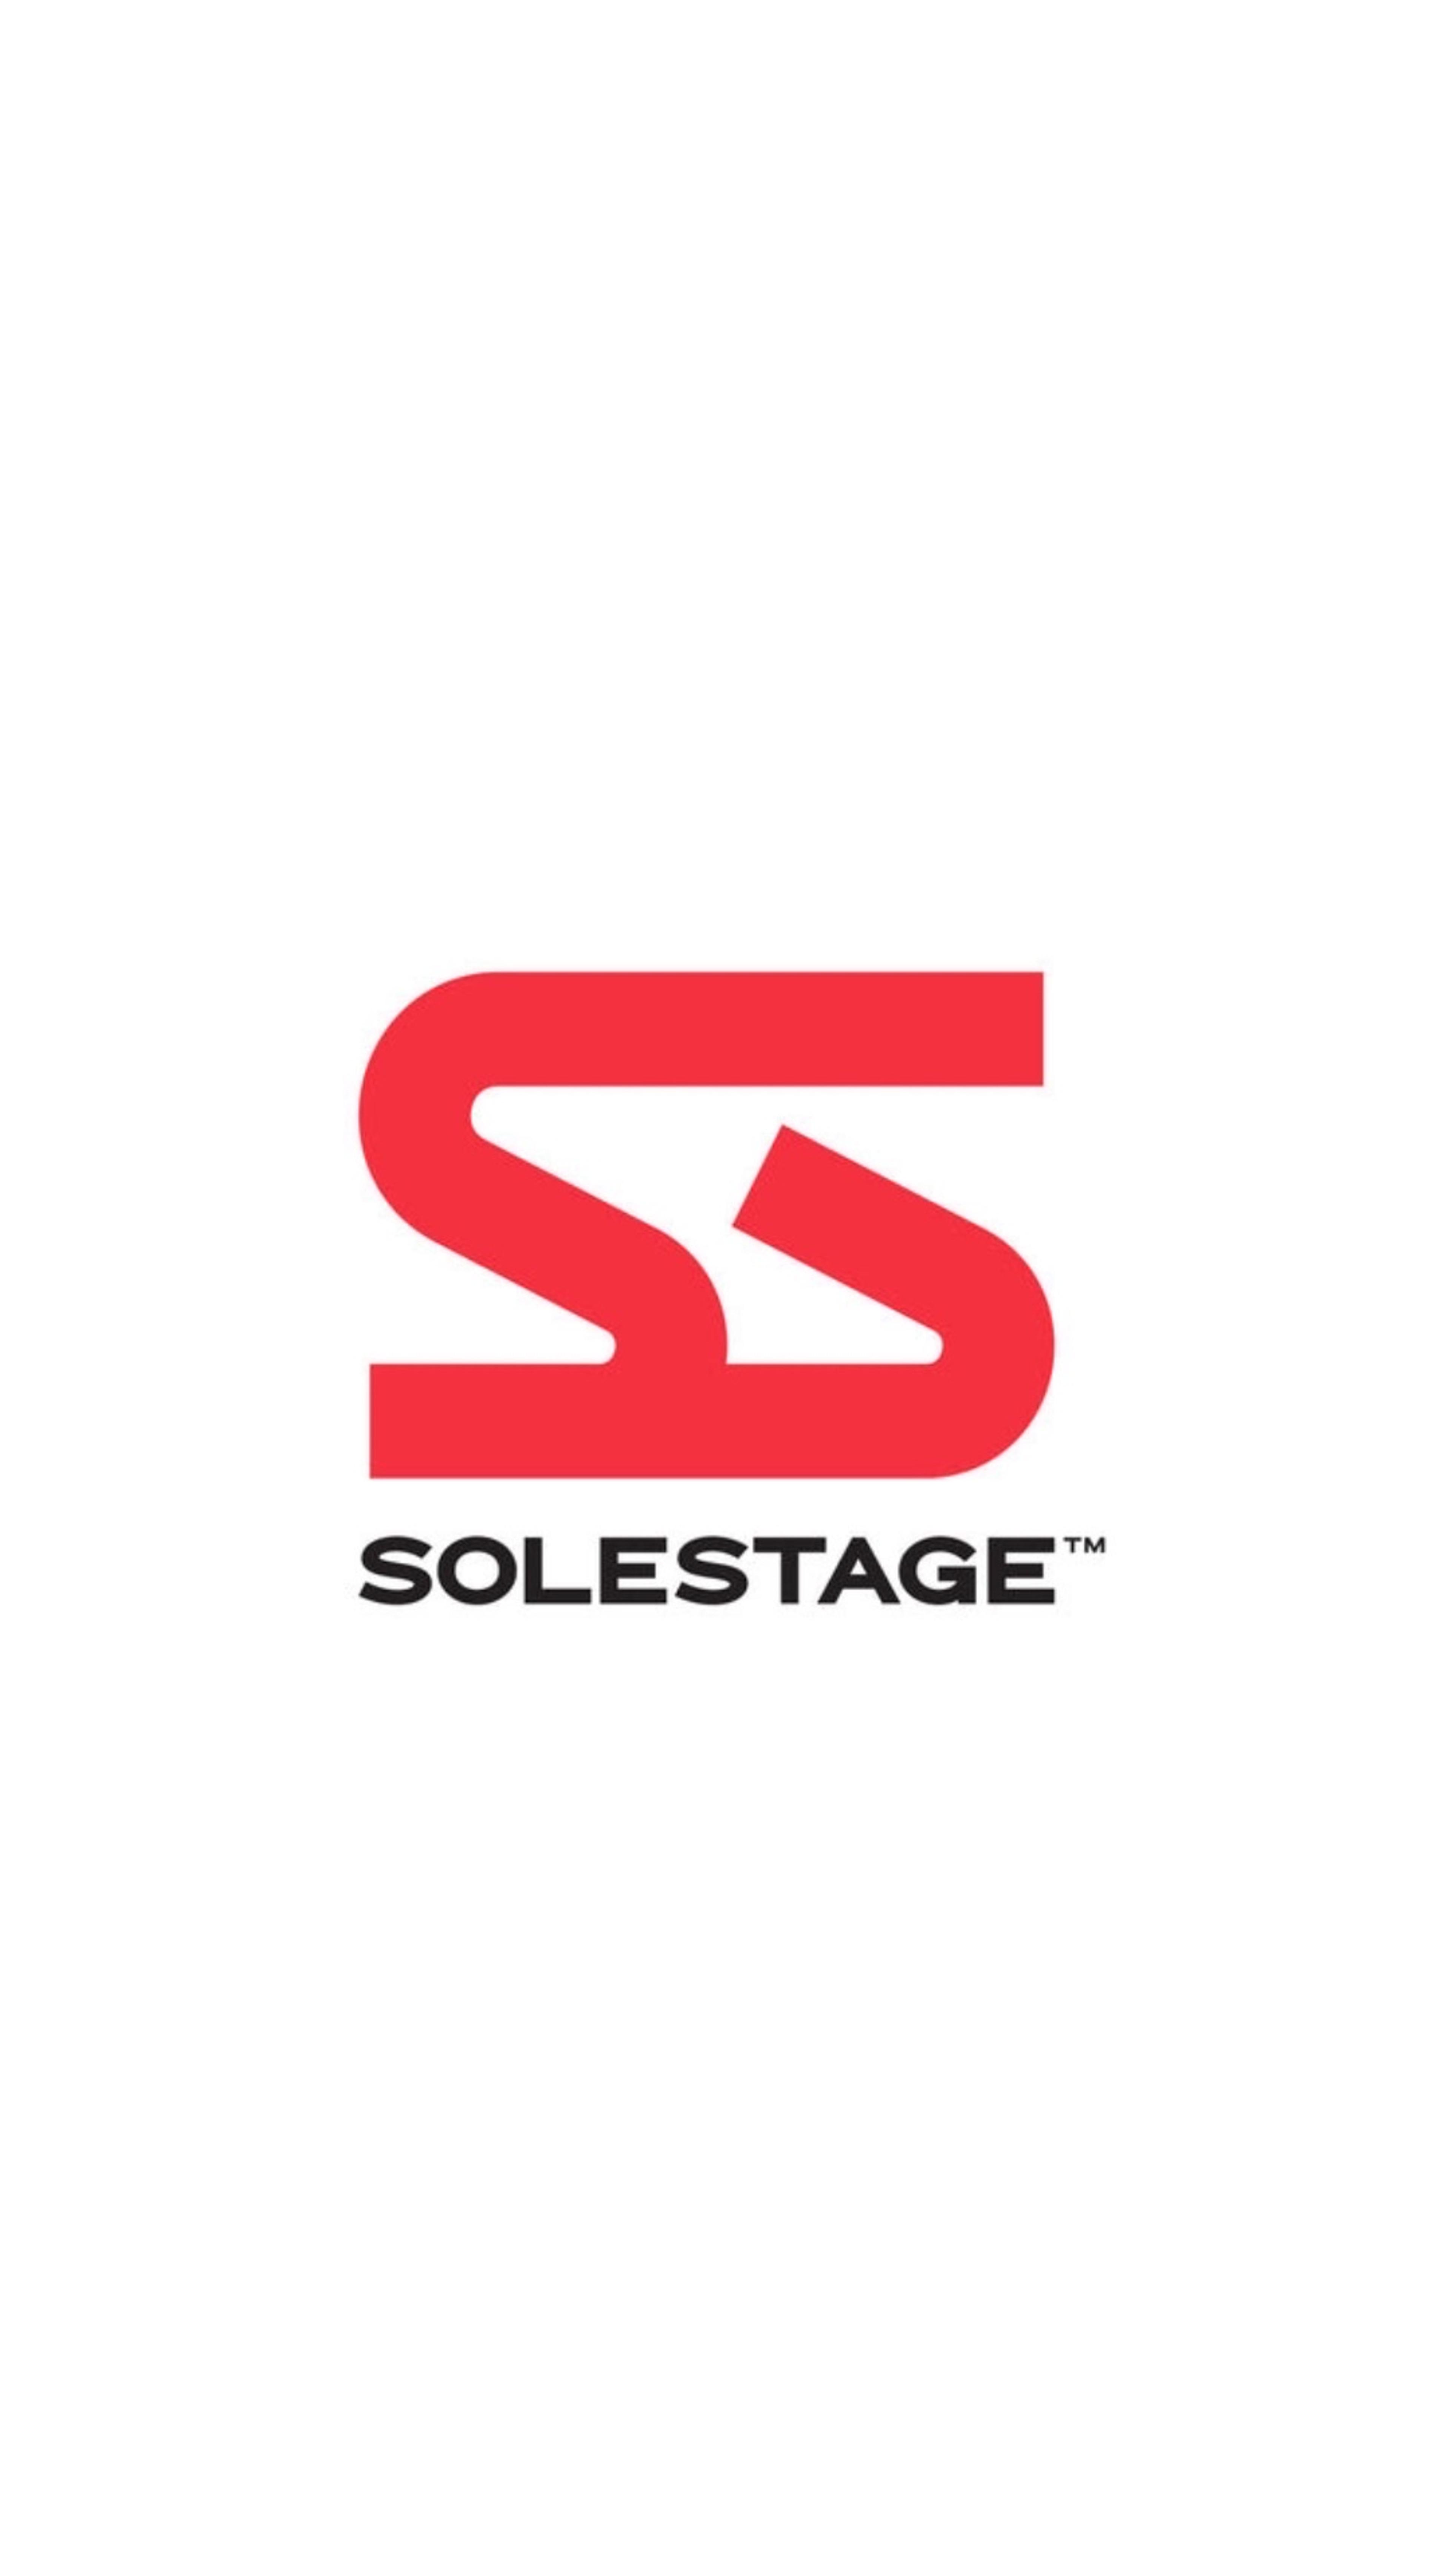 Preview image for the show titled "SoleStage Weekly" at Today @ 11:30 PM